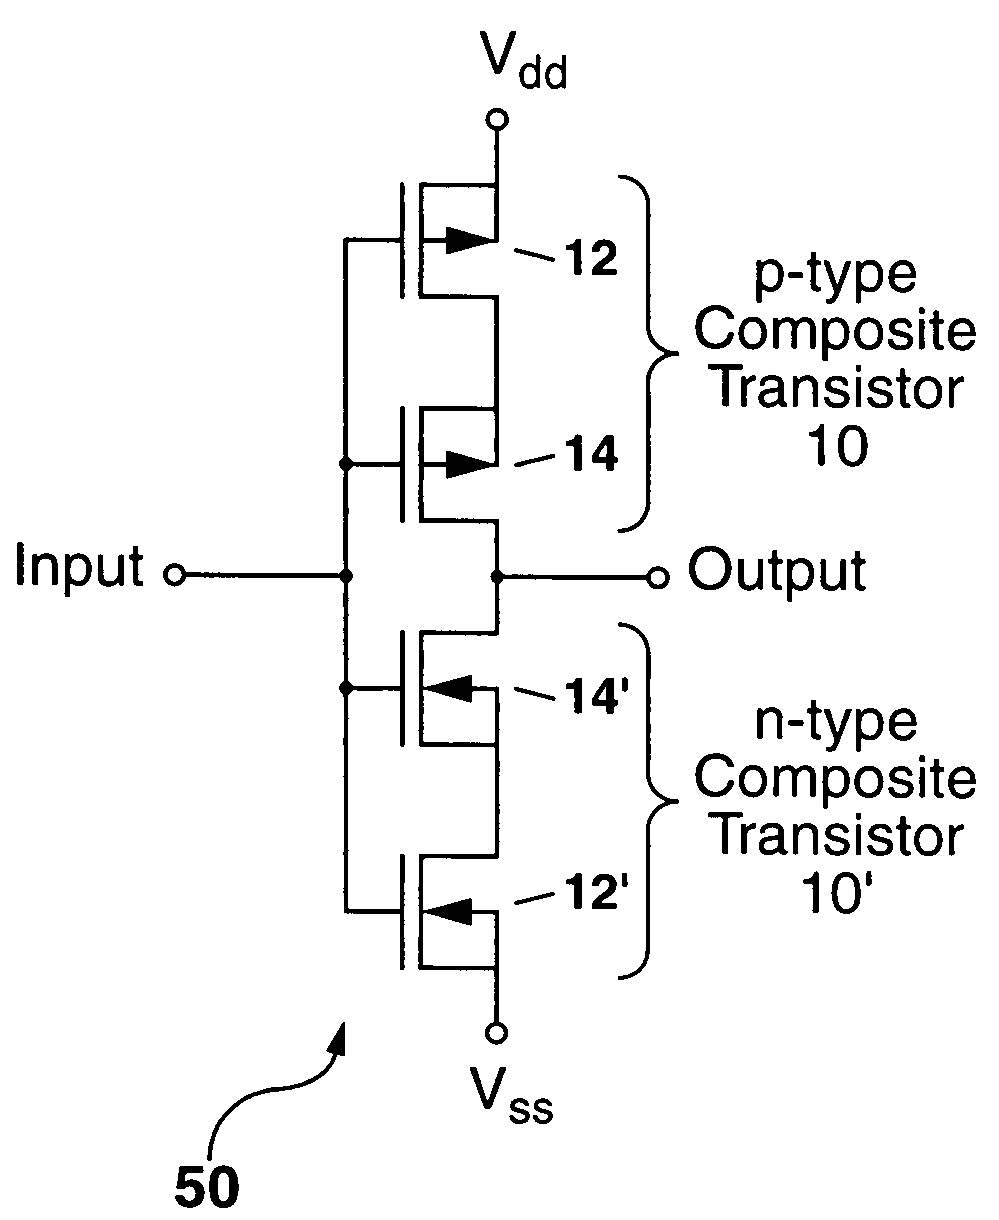 Radiation-hardened transistor and integrated circuit